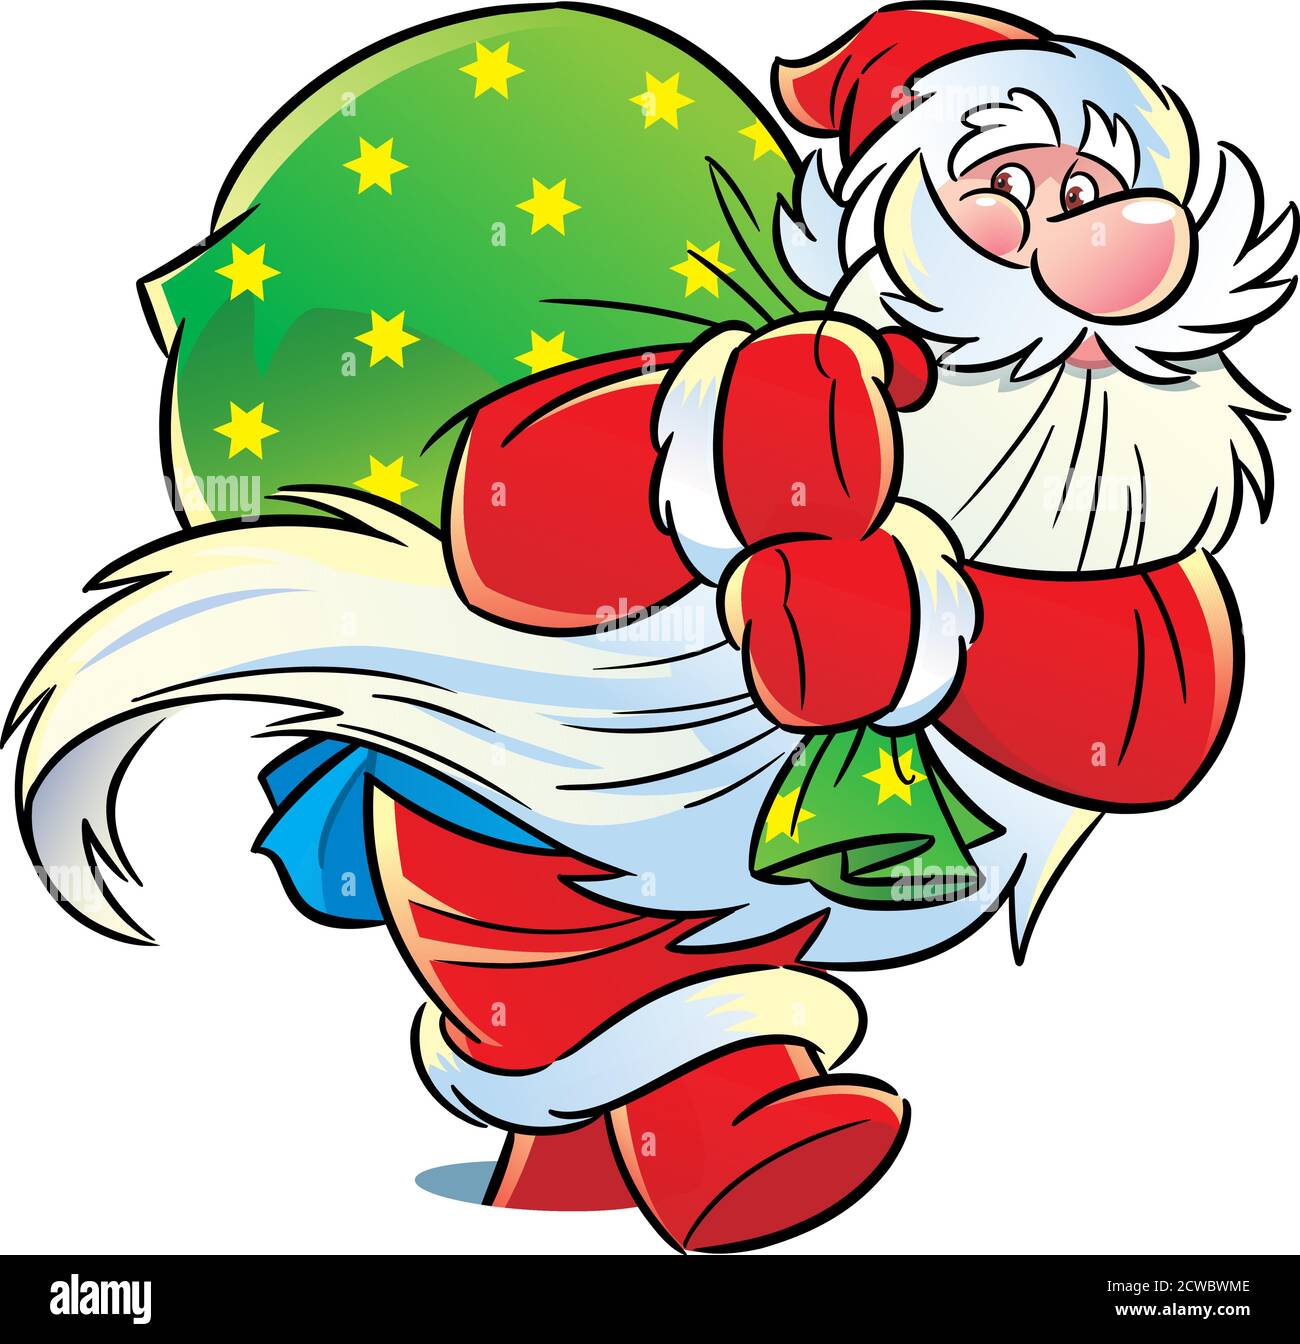 Vector illustration shows Santa Claus walking with a bag of gifts. Illustration made in cartoon style isolated on white backg Stock Vector